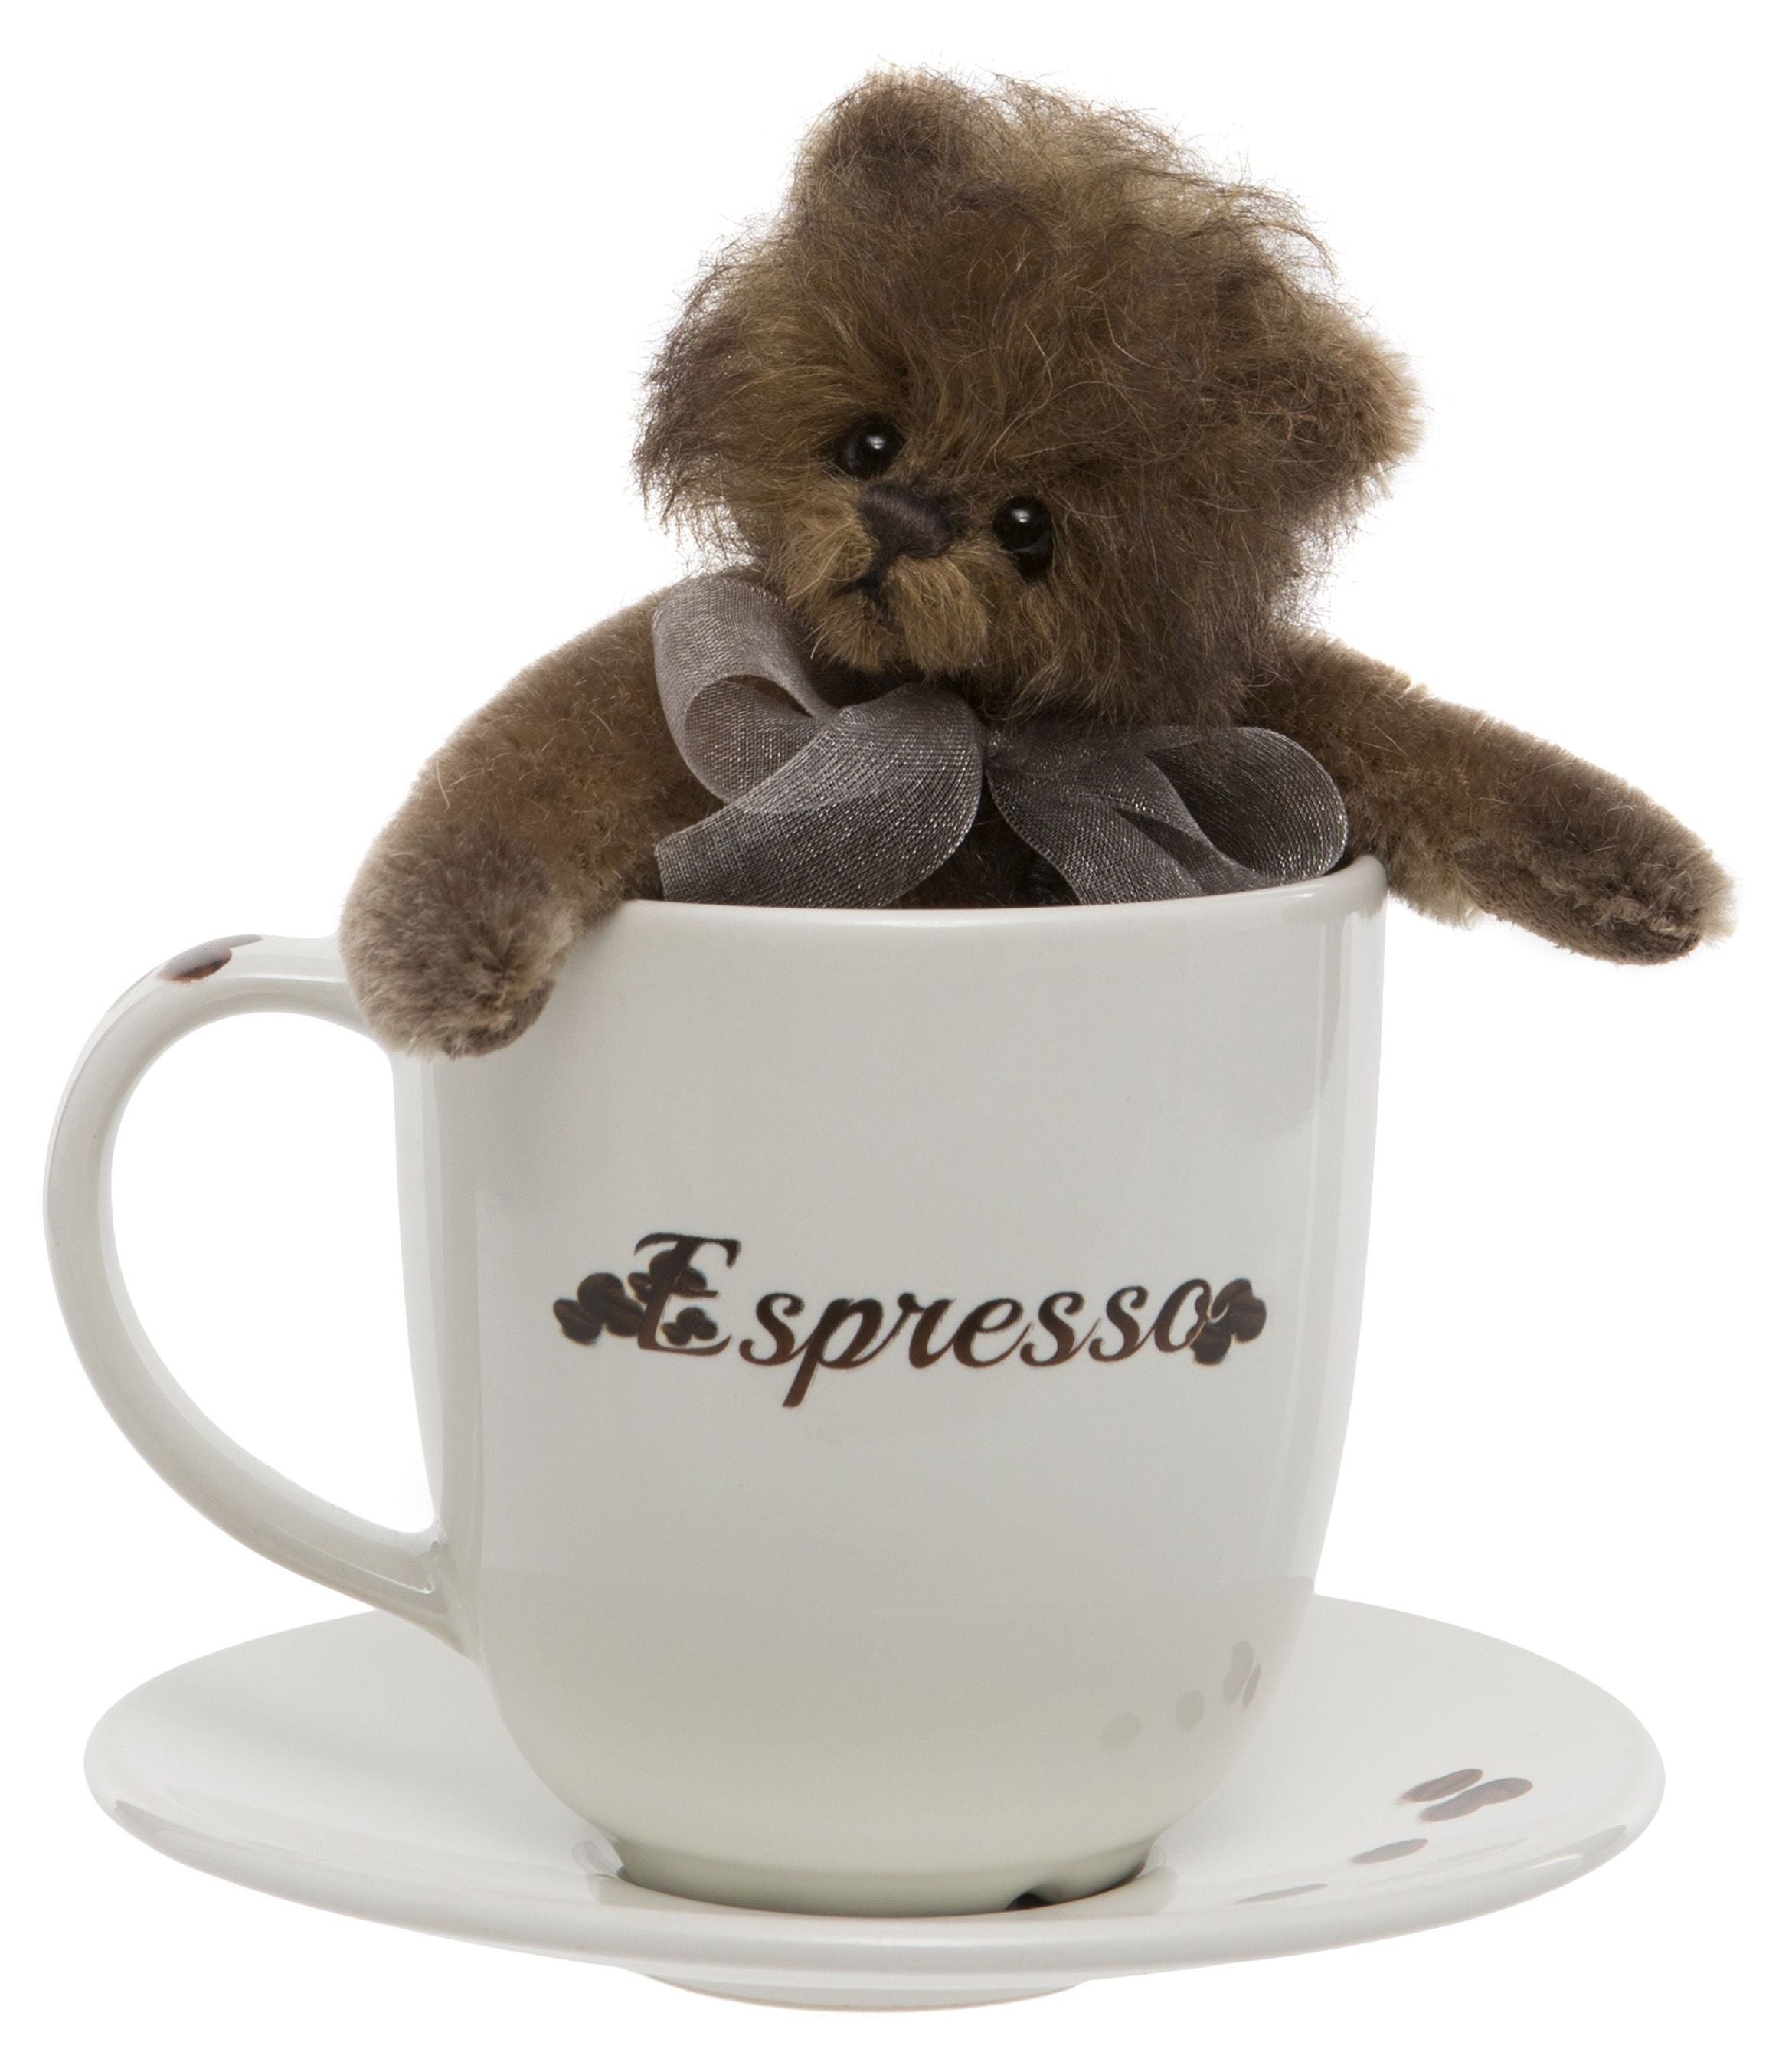 Charlie Bears Espresso Teddy Bear Cup and Saucer Gift Set